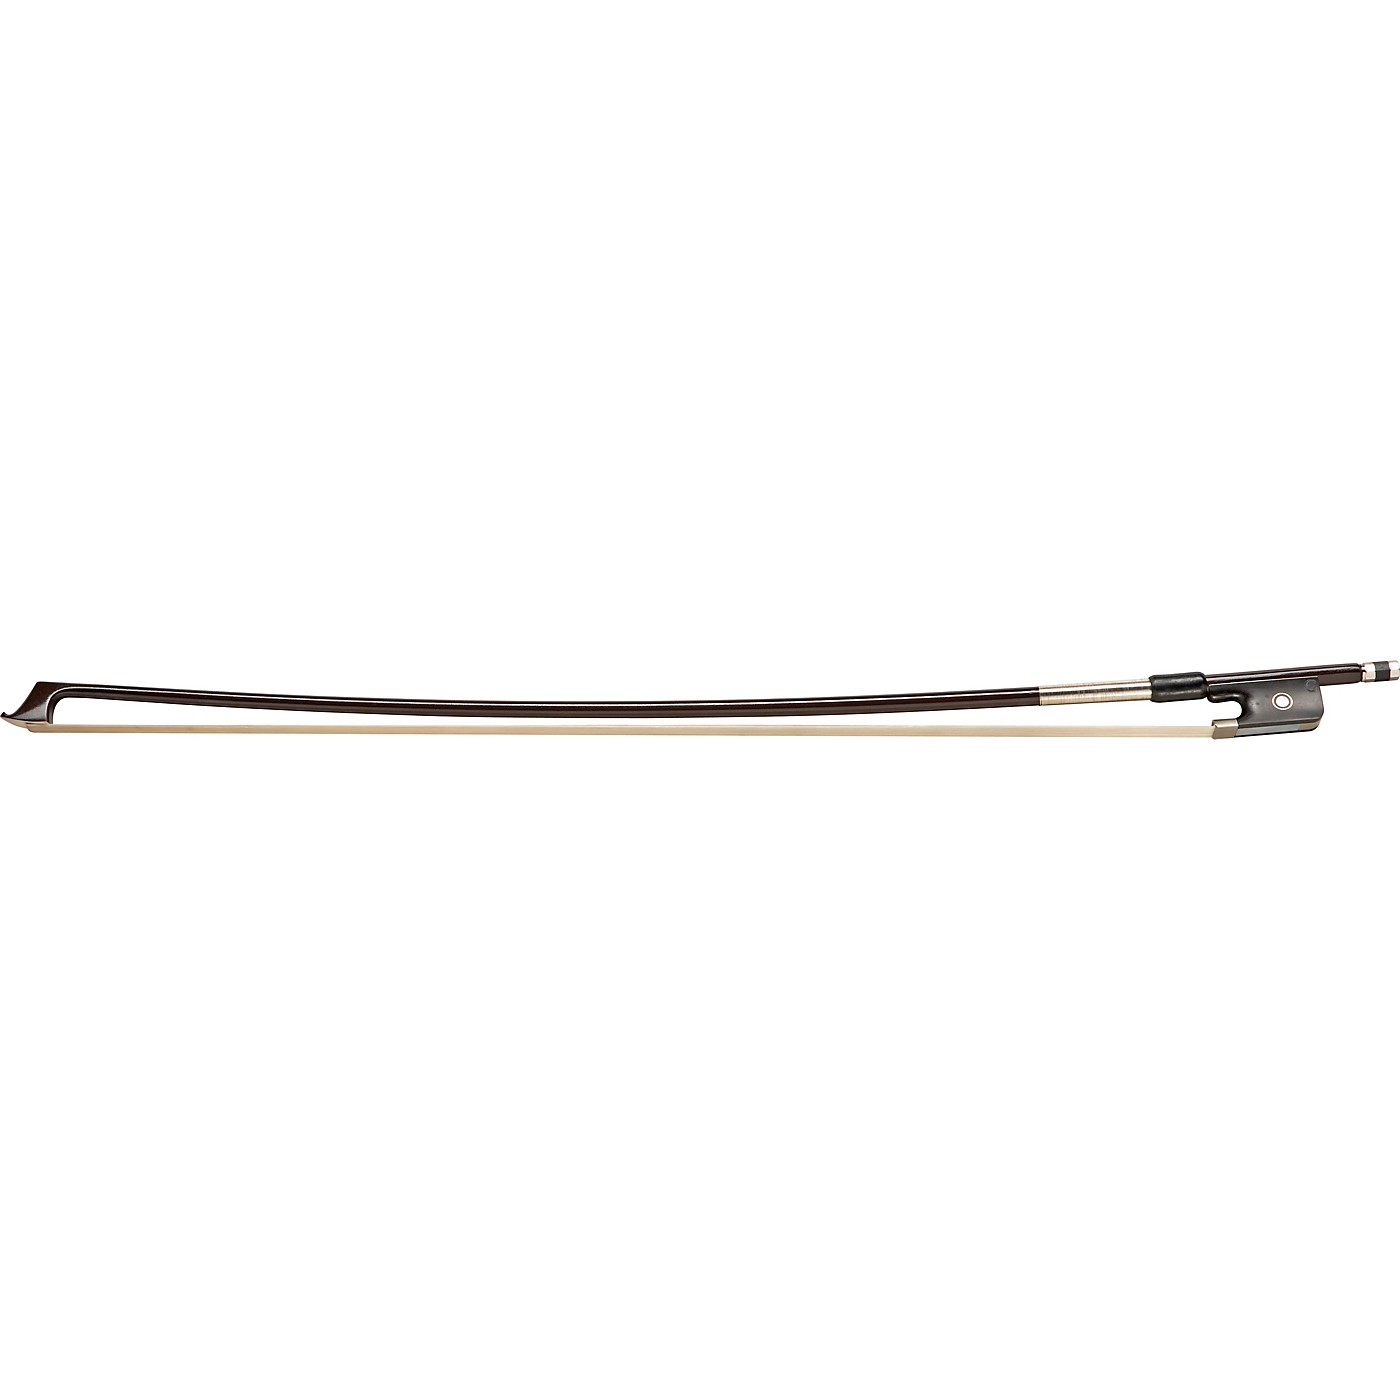 Glasser Viola Bow Advanced Composite, Fully-Lined Ebony Frog, Nickel Wire Grip thumbnail